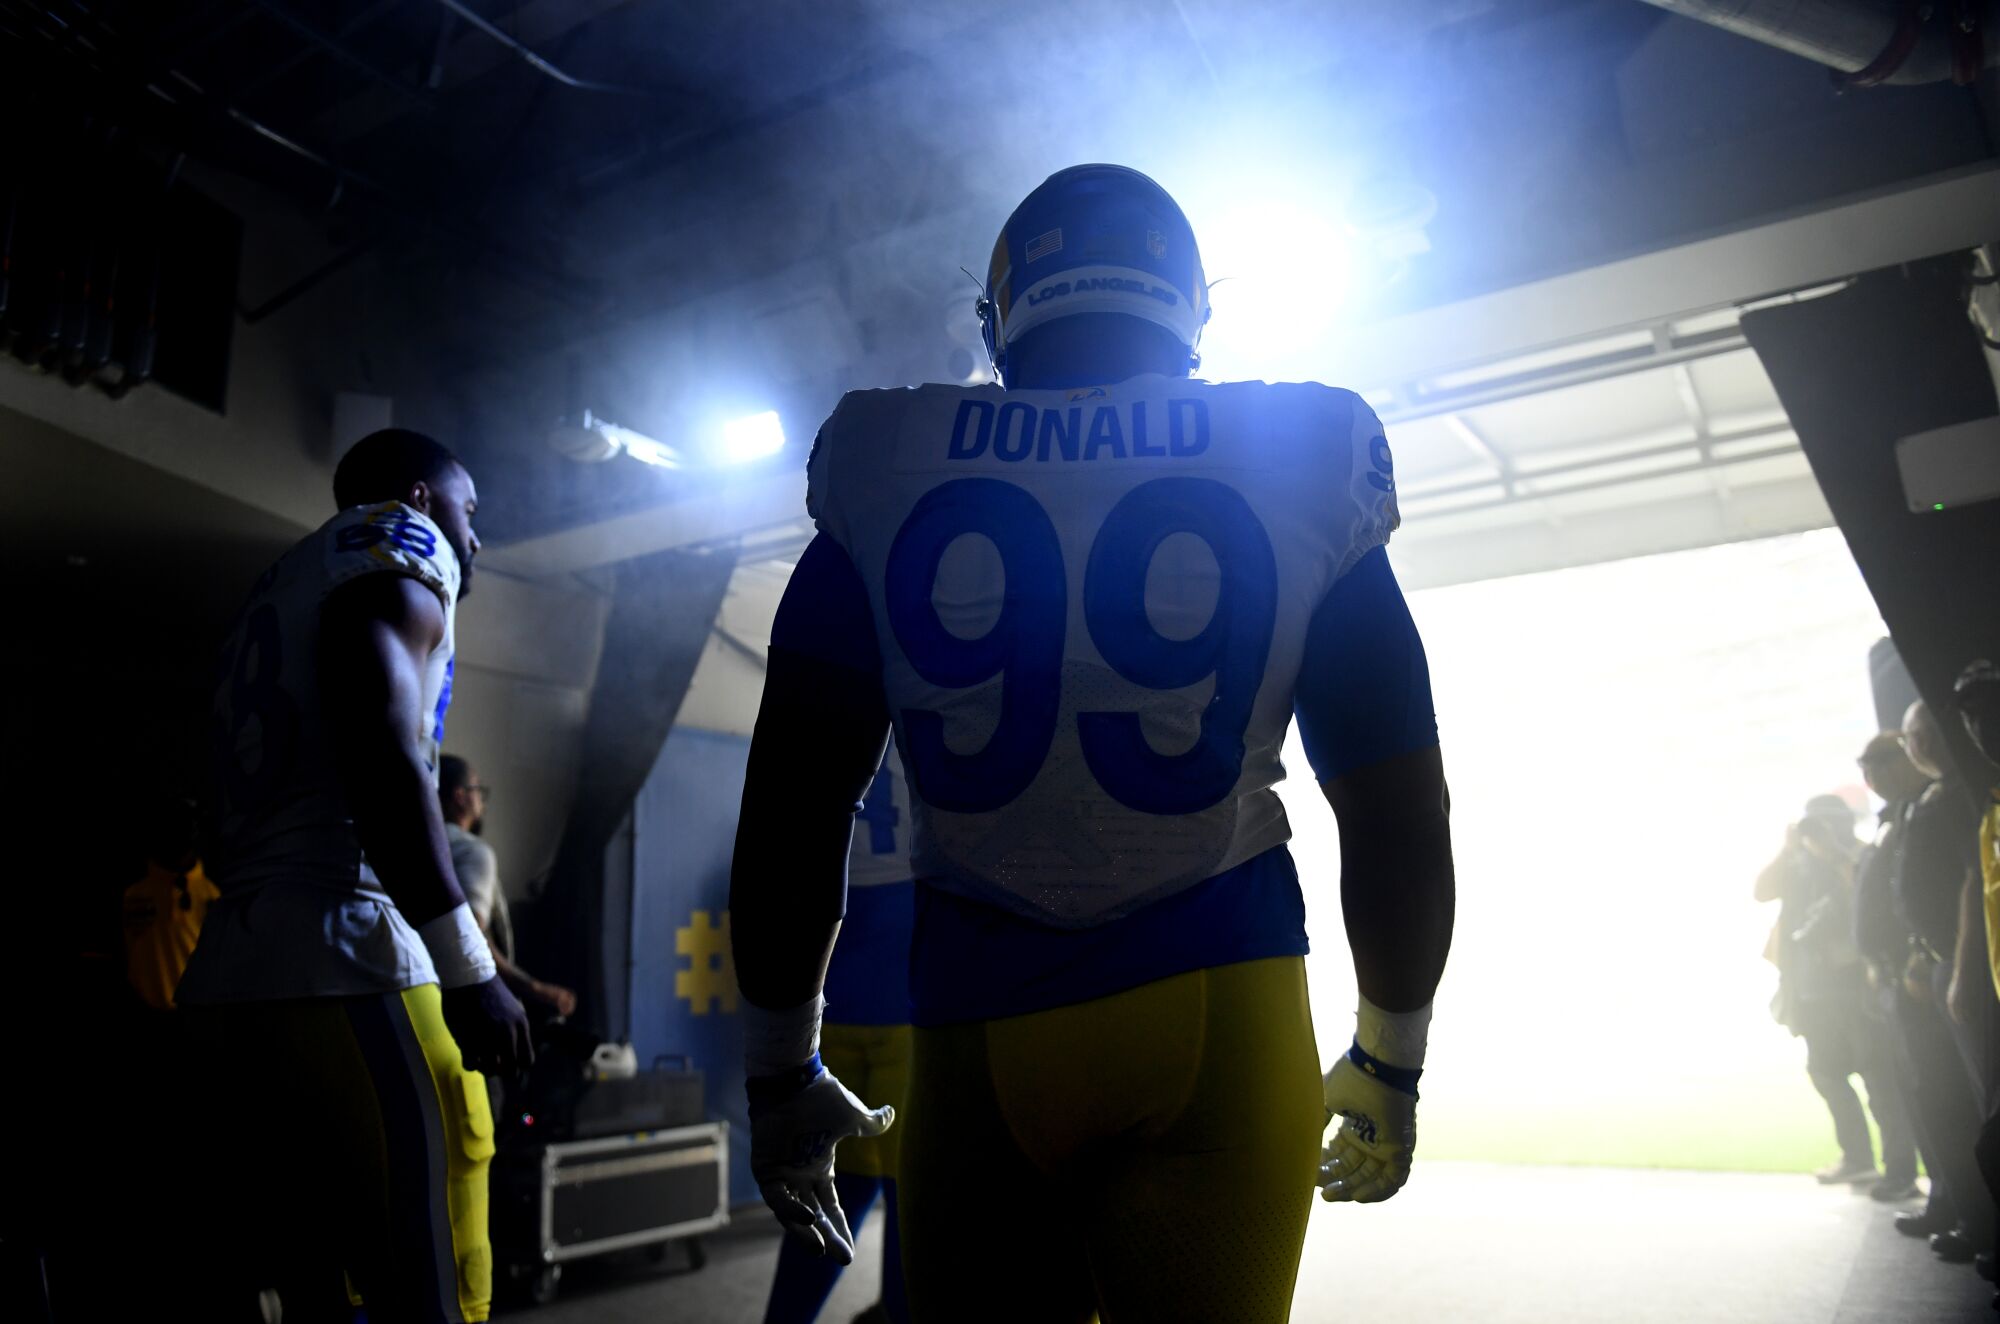 Rams defenisve tackle Aaron Donald waits in the tunnel before being introduced.